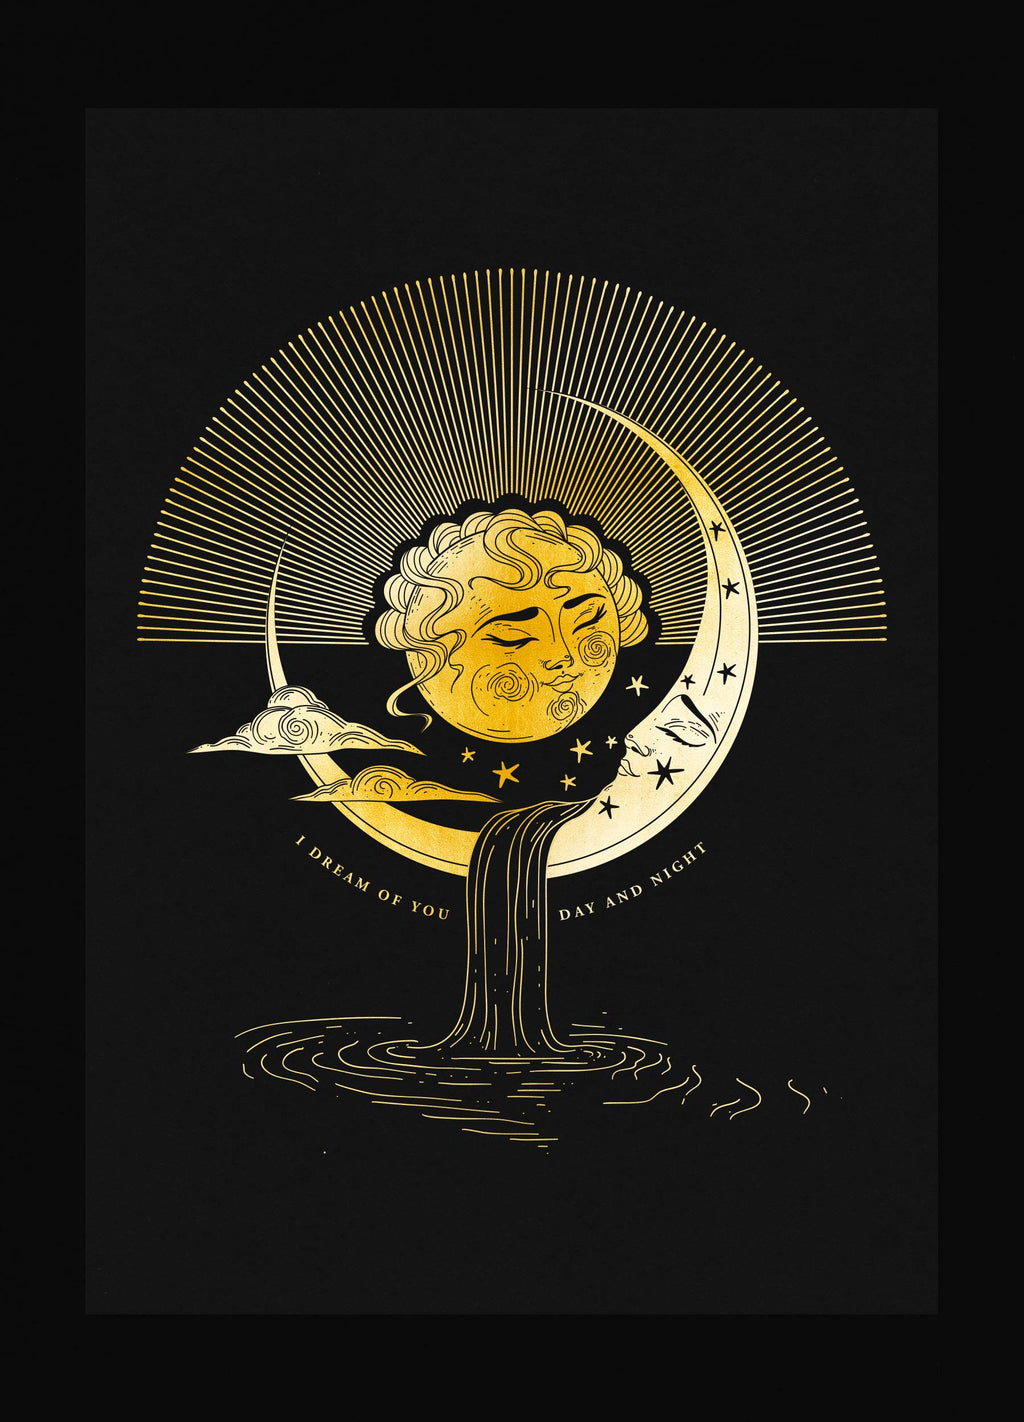 "I Dream of You" Art print in gold foil on black paper with Moon and Sun in a dream by Cocorrina & Co